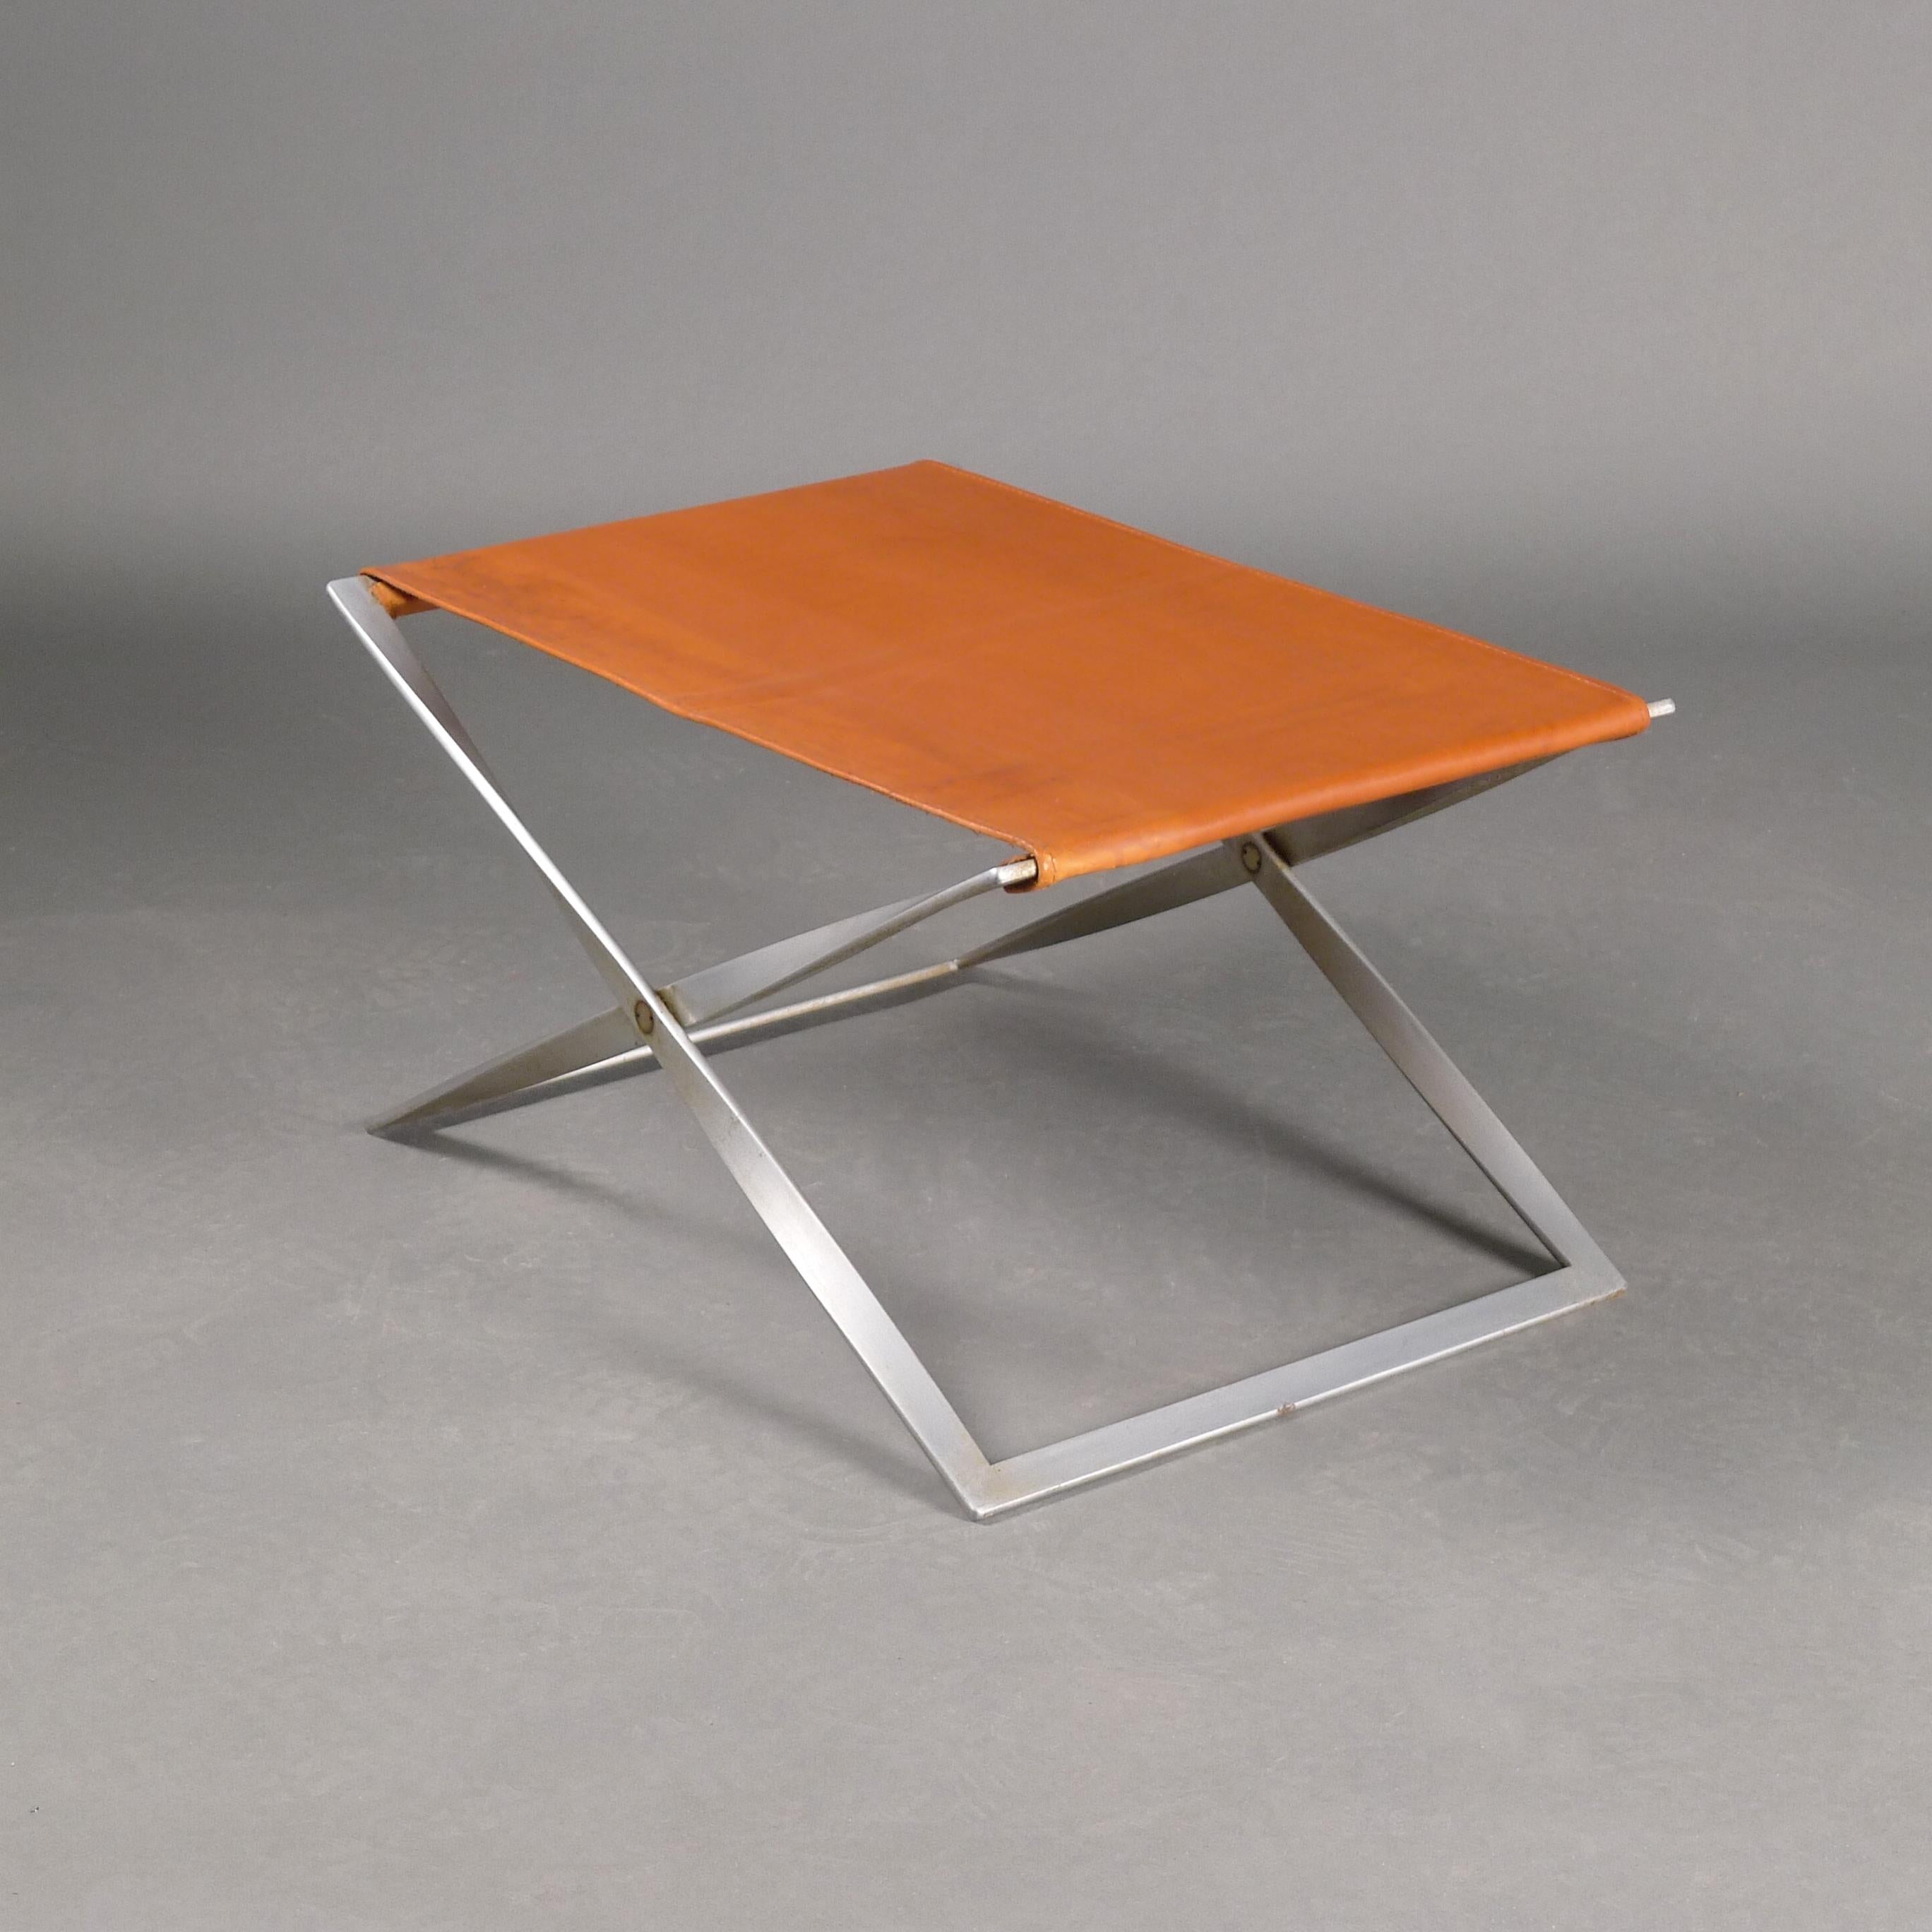 Poul Kjaerholm for E Kold Christensen, Denmark, 1960s

A PK-91 folding stool in chromed steel with vintage tan leather. Stool is stamped and displays the early stepped knuckle joints at the corners of the metal. The propeller joints contain